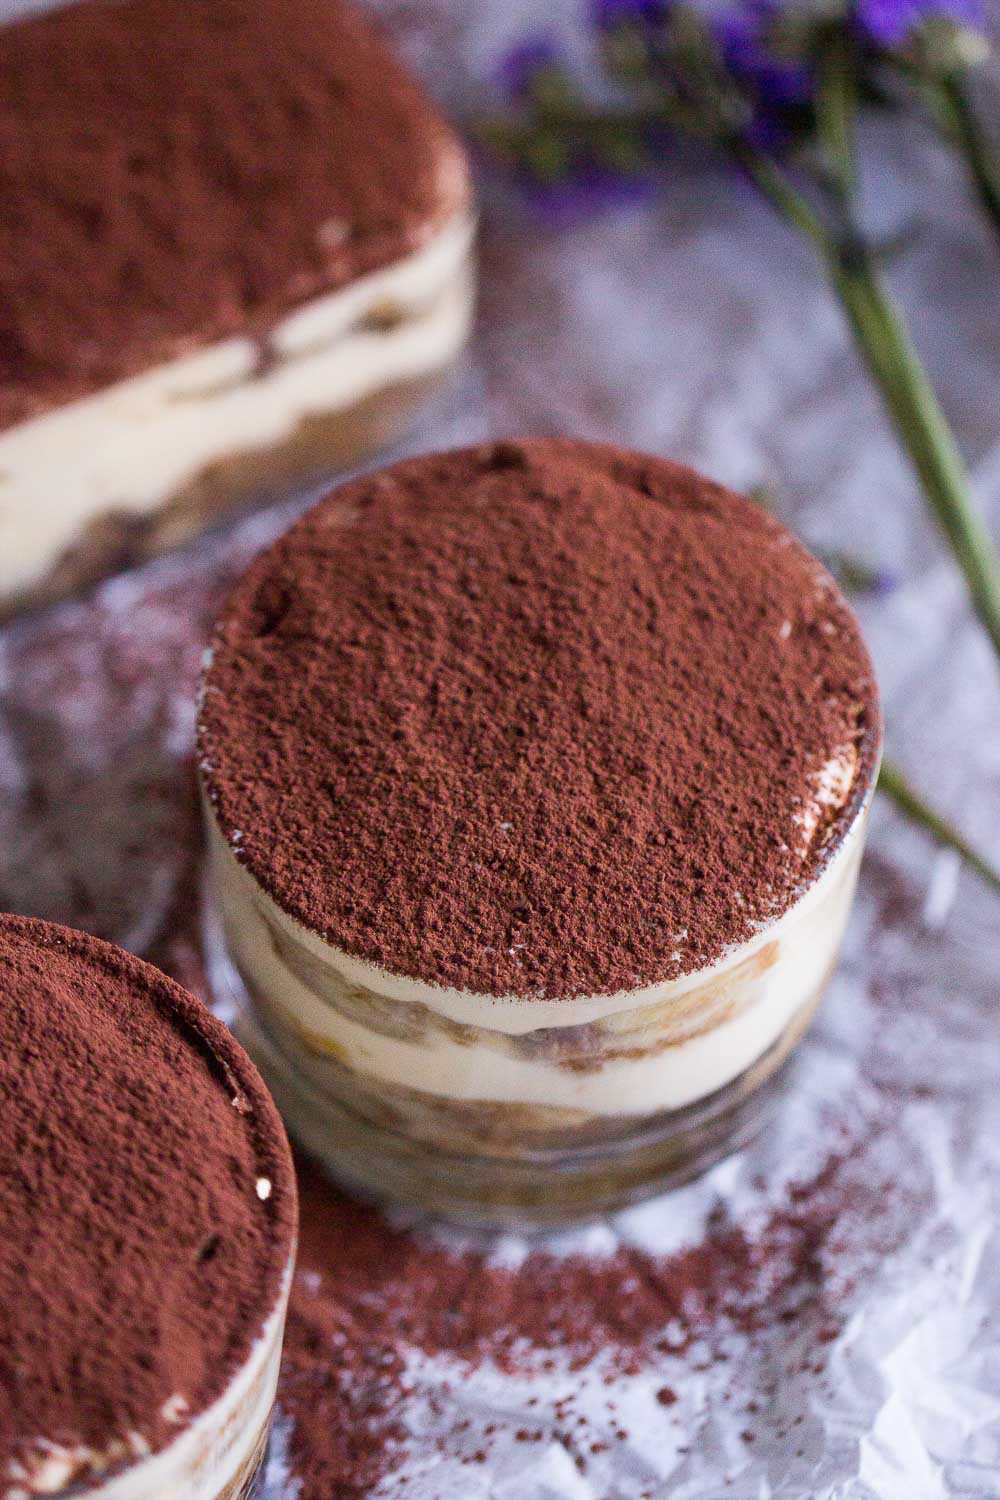 Yep, it’s a real thing, y’all. Beeramisu. Best Stout Beer Tiramisu instead of rum. Plus, you only need six main ingredients to make the best no-bake dessert! It has a unique taste and melt-in-the-mouth texture and is indispensable for dessert pleasures.